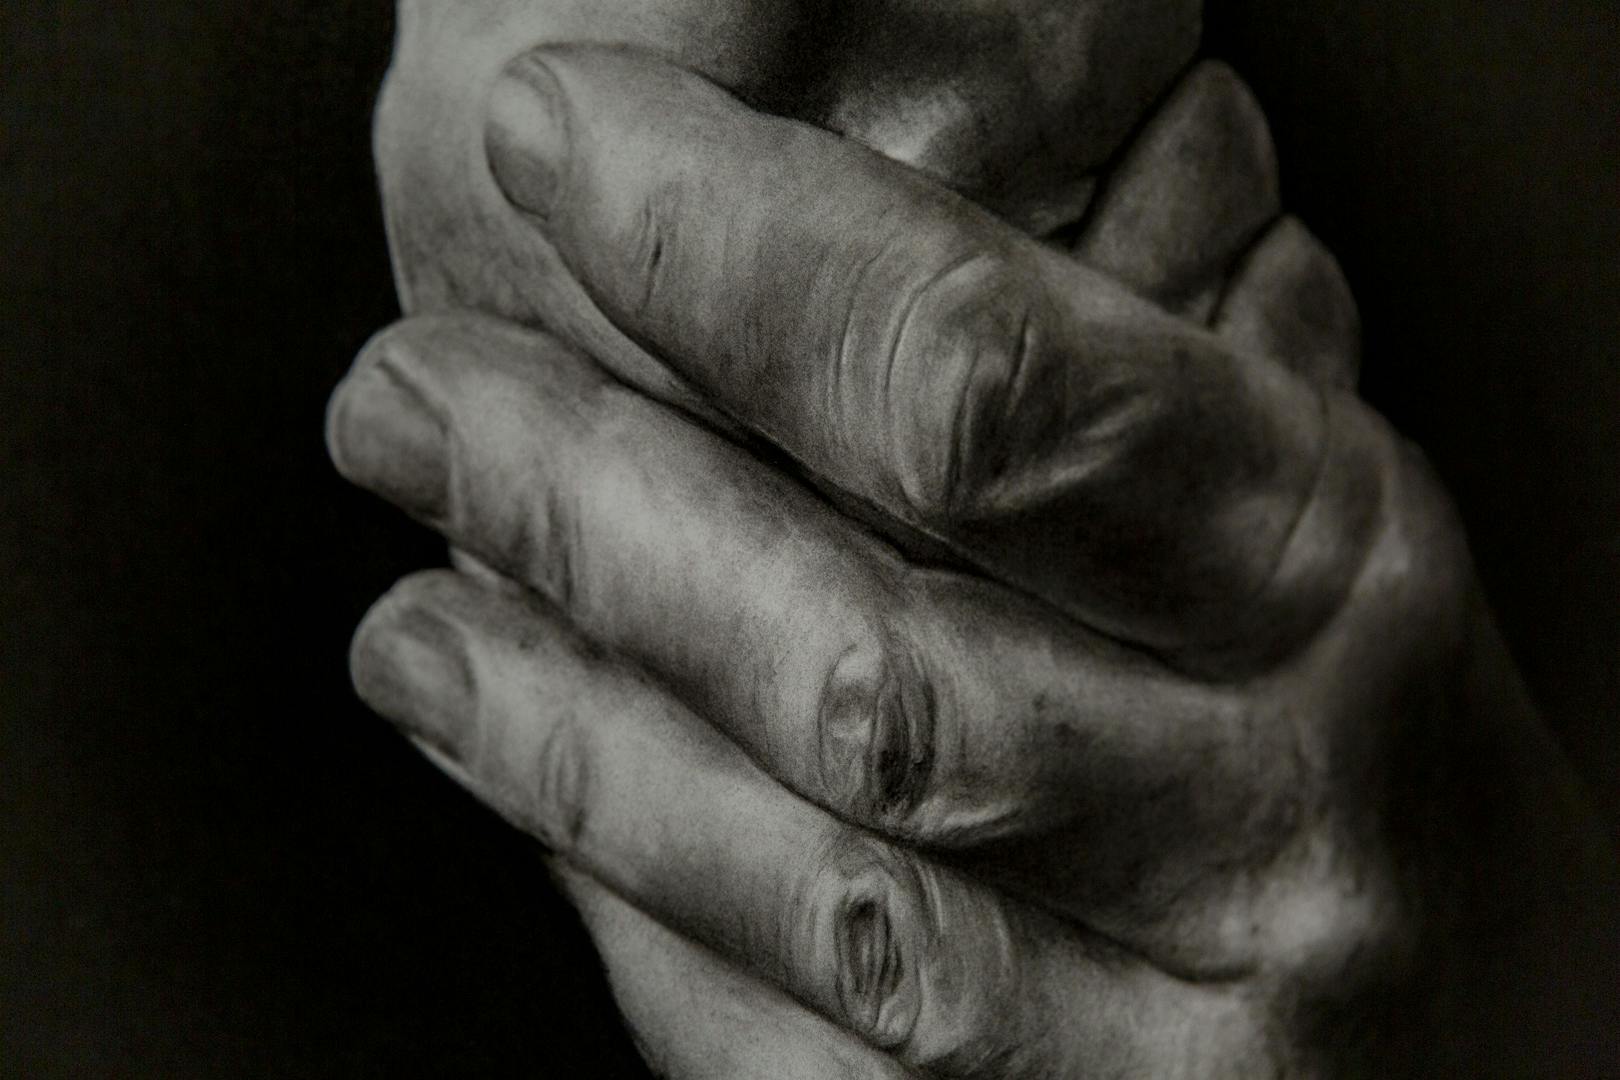 Image shows a black and white or grey scale hand drawn image of two hands clasped together